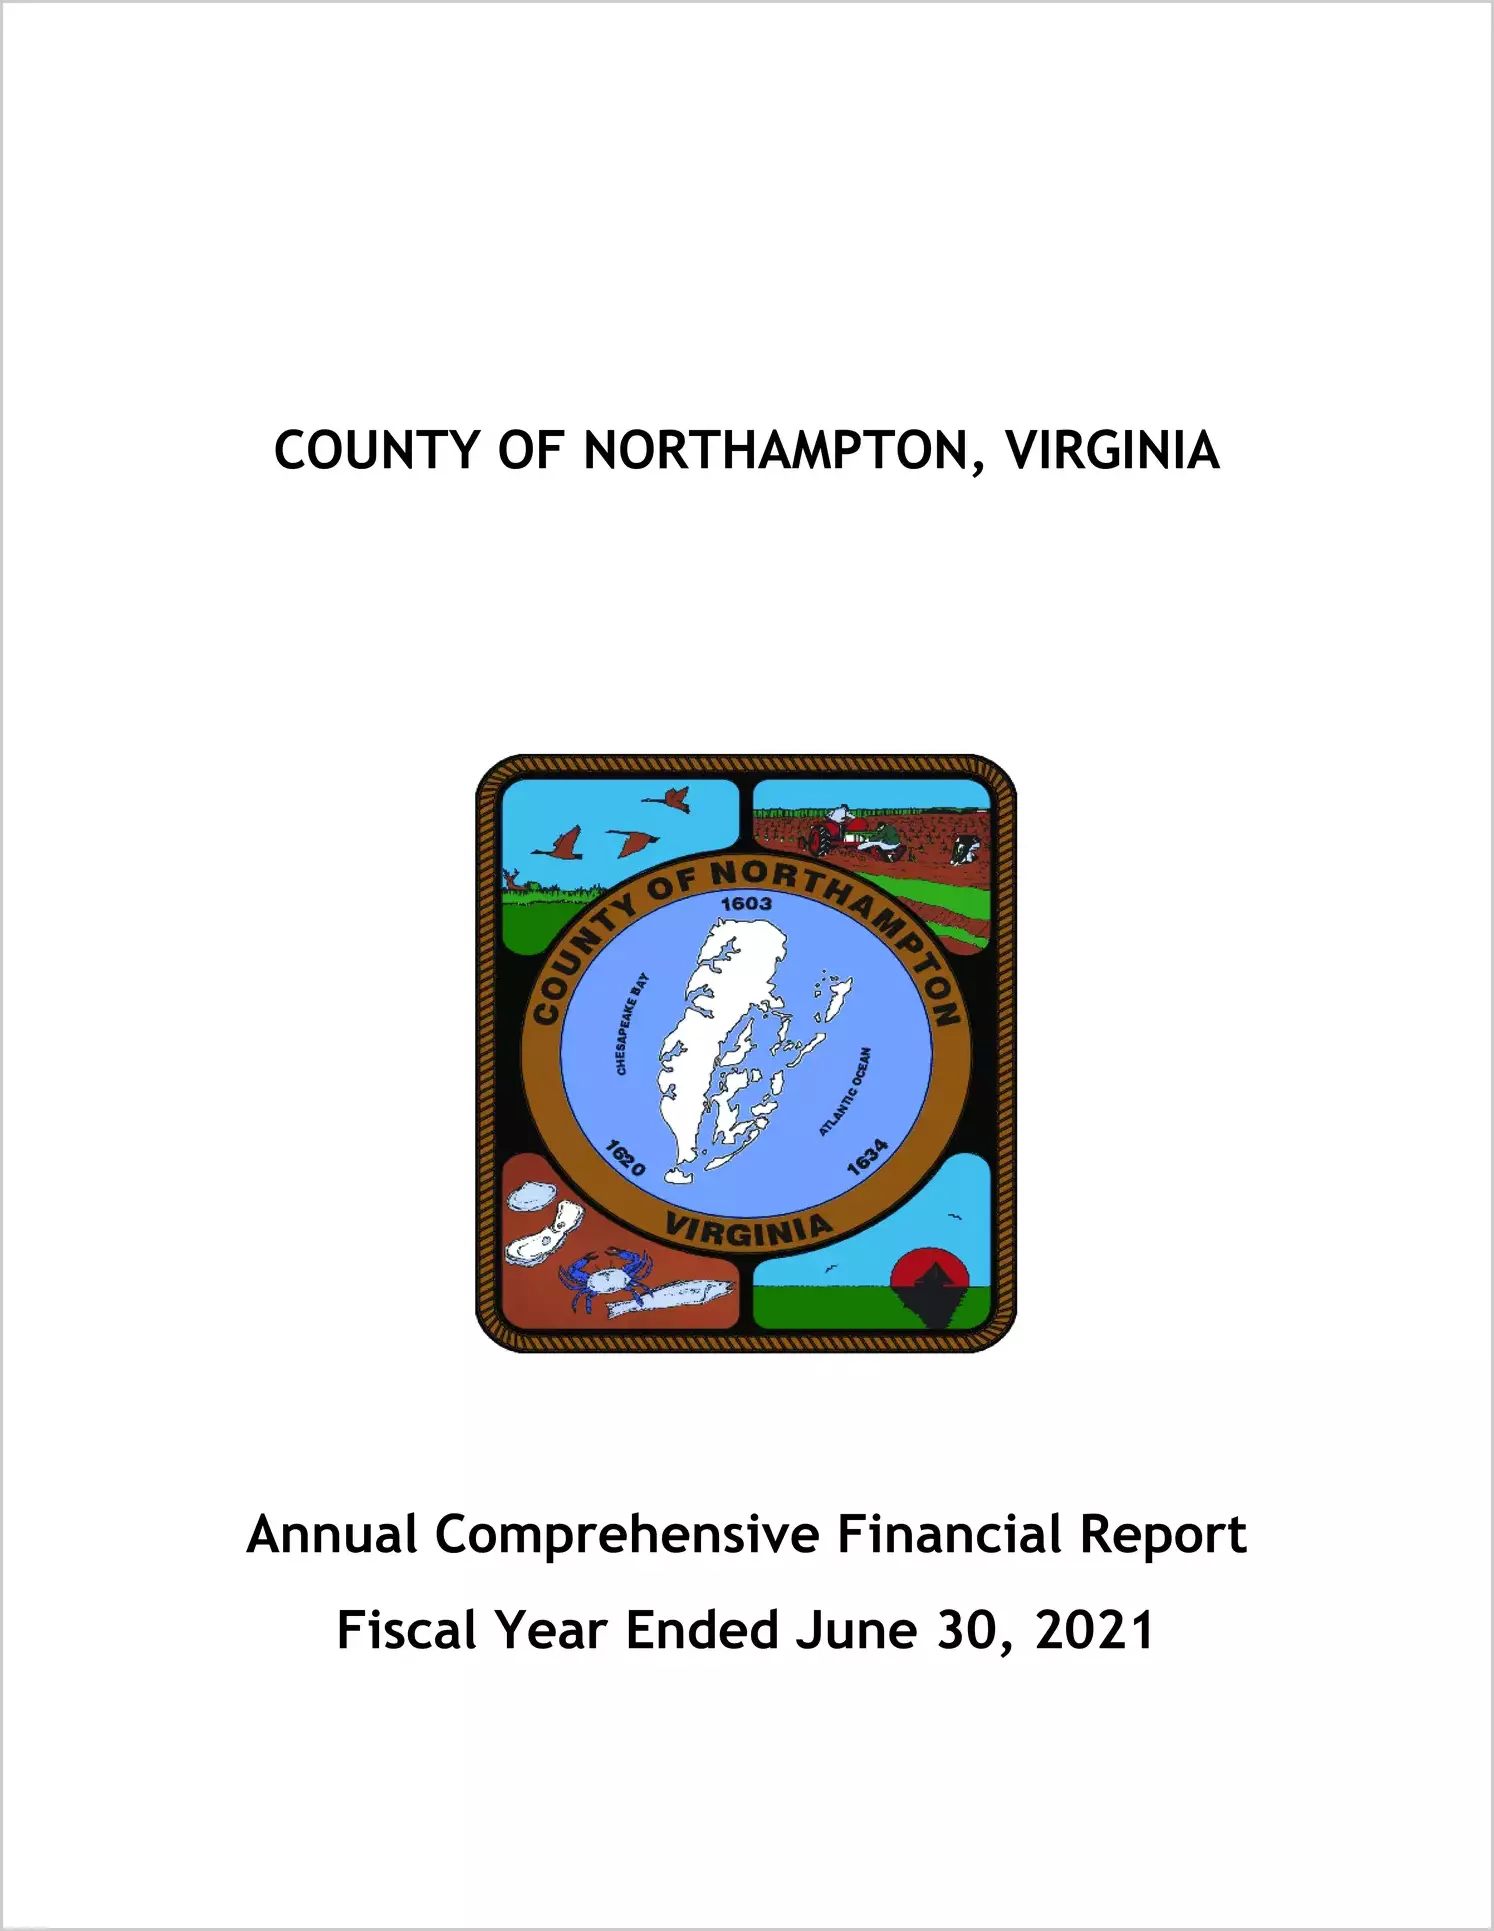 2021 Annual Financial Report for County of Northampton